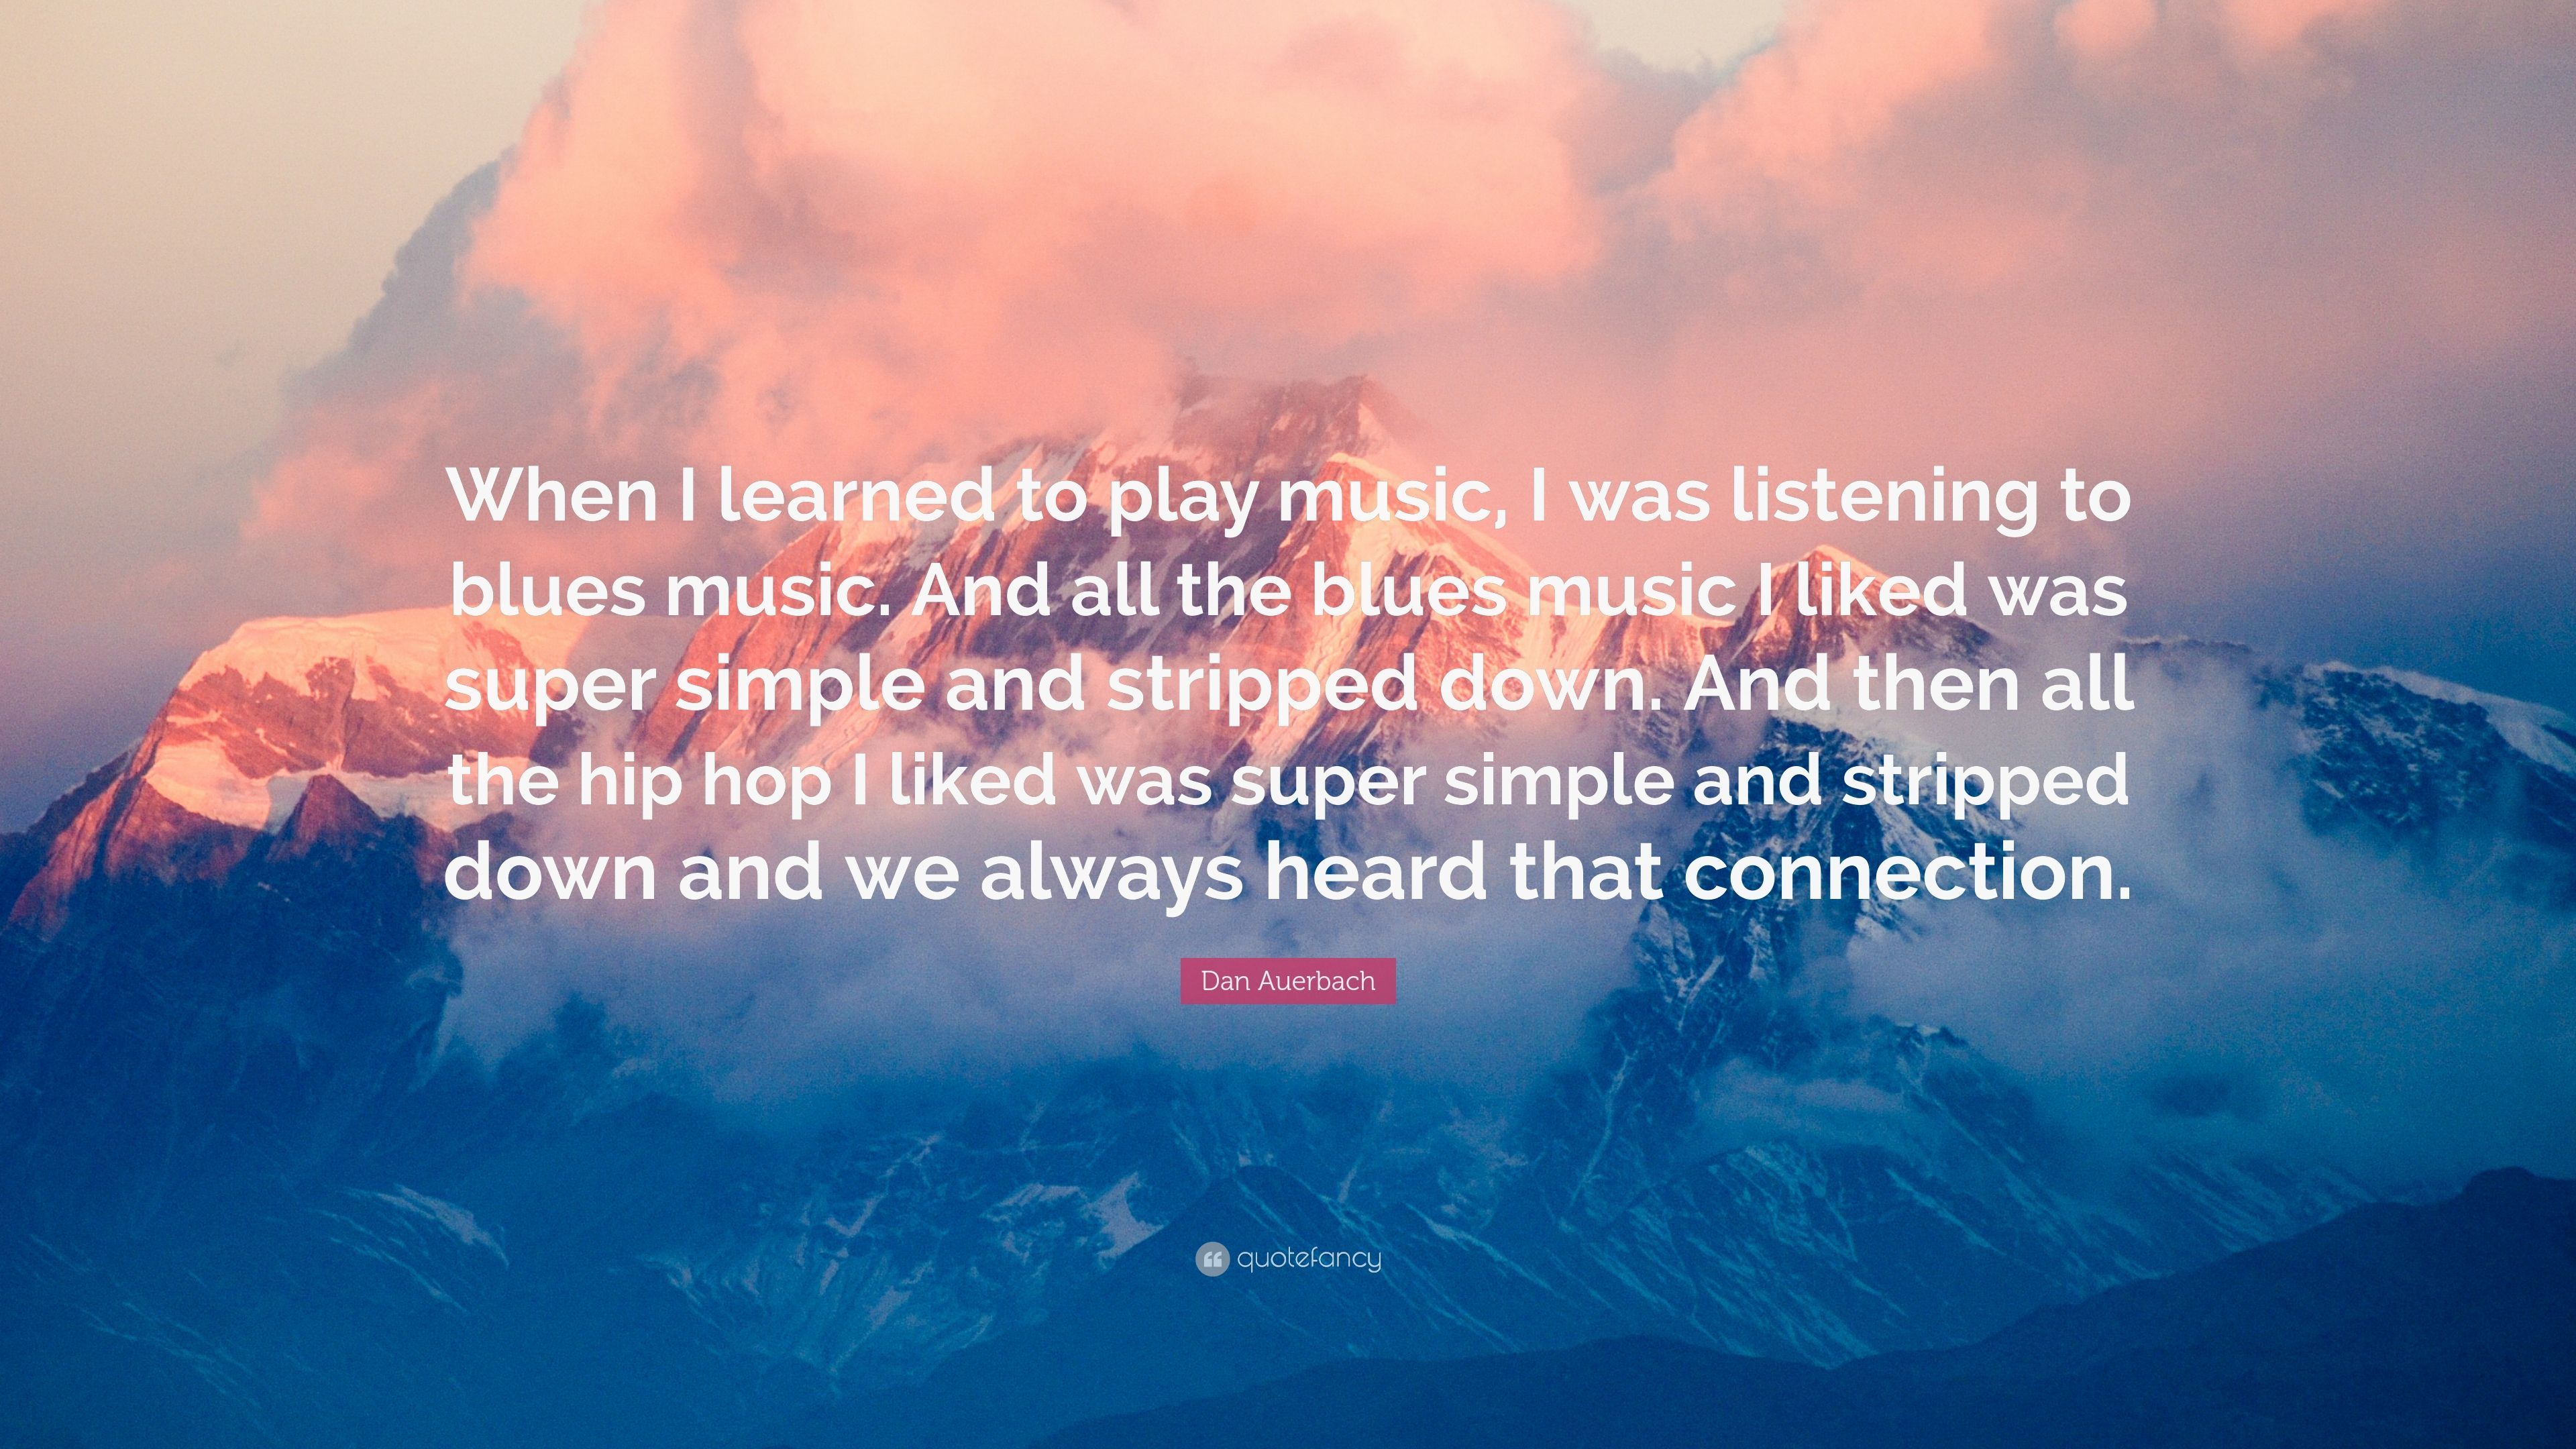 Dan Auerbach Quote: “When I learned to play music, I was listening